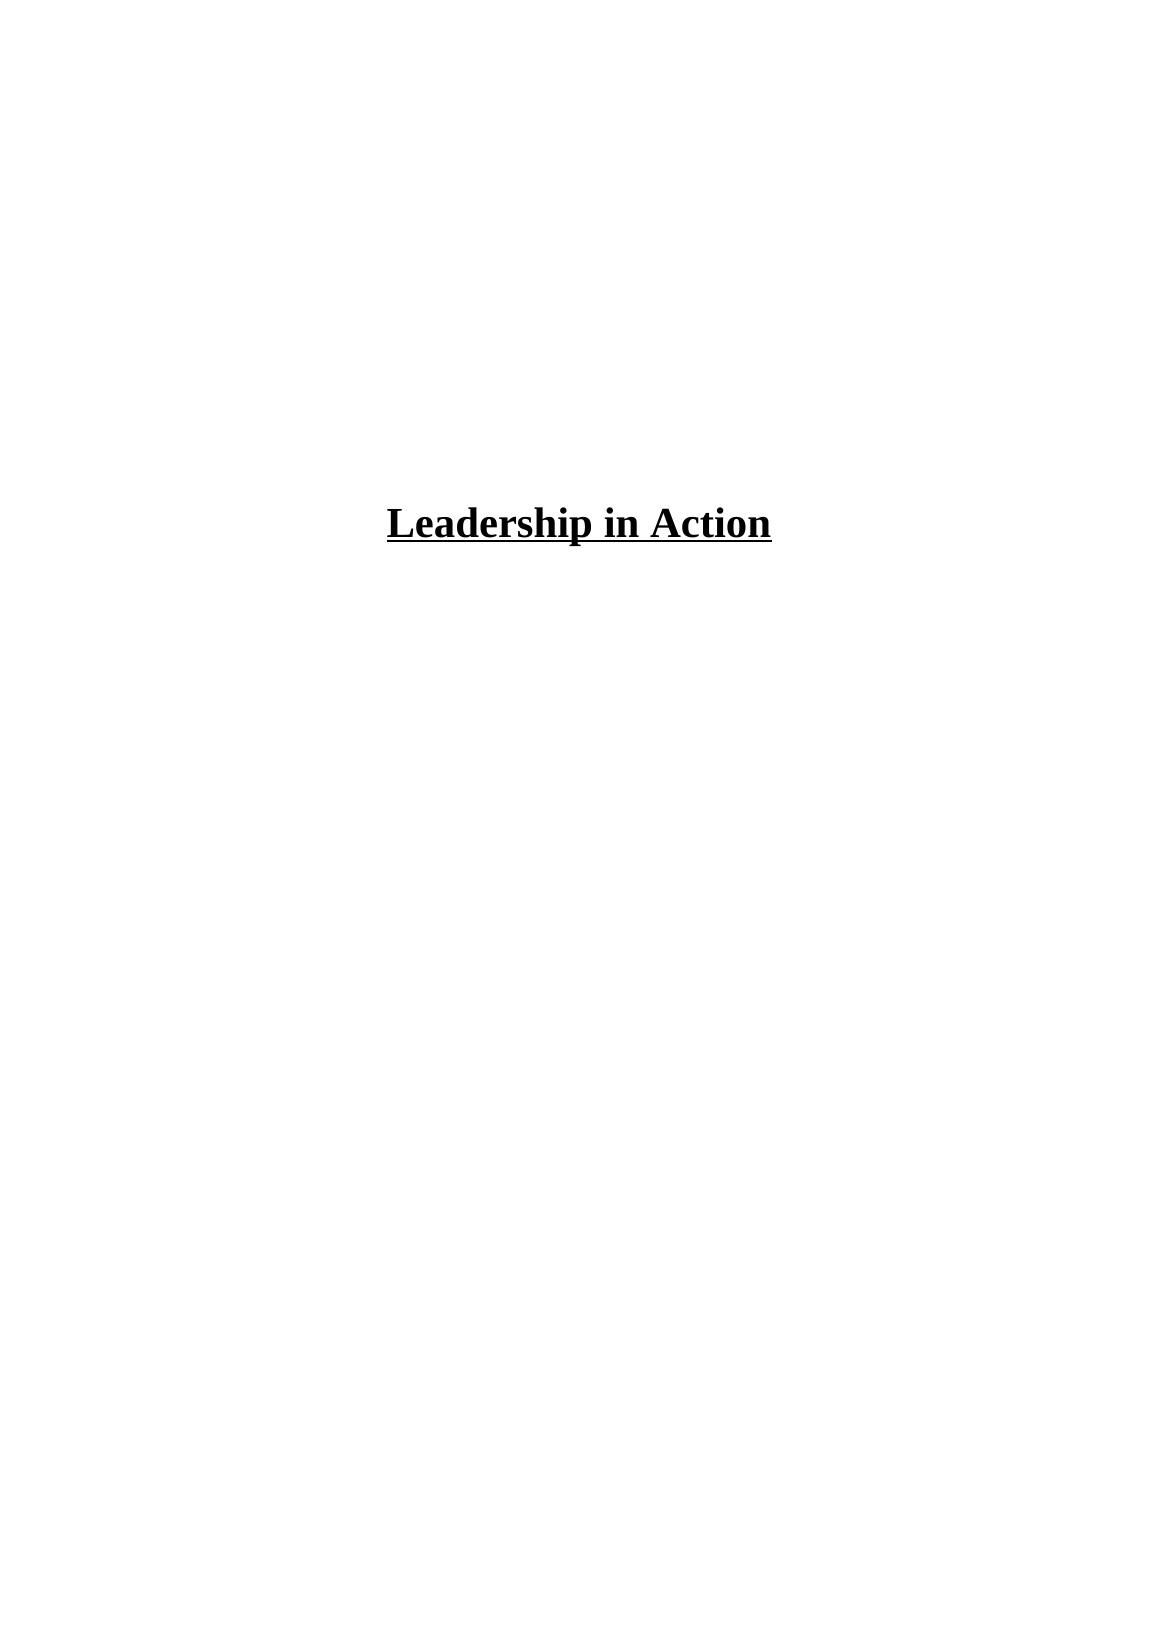 Leadership in Action - Report_1